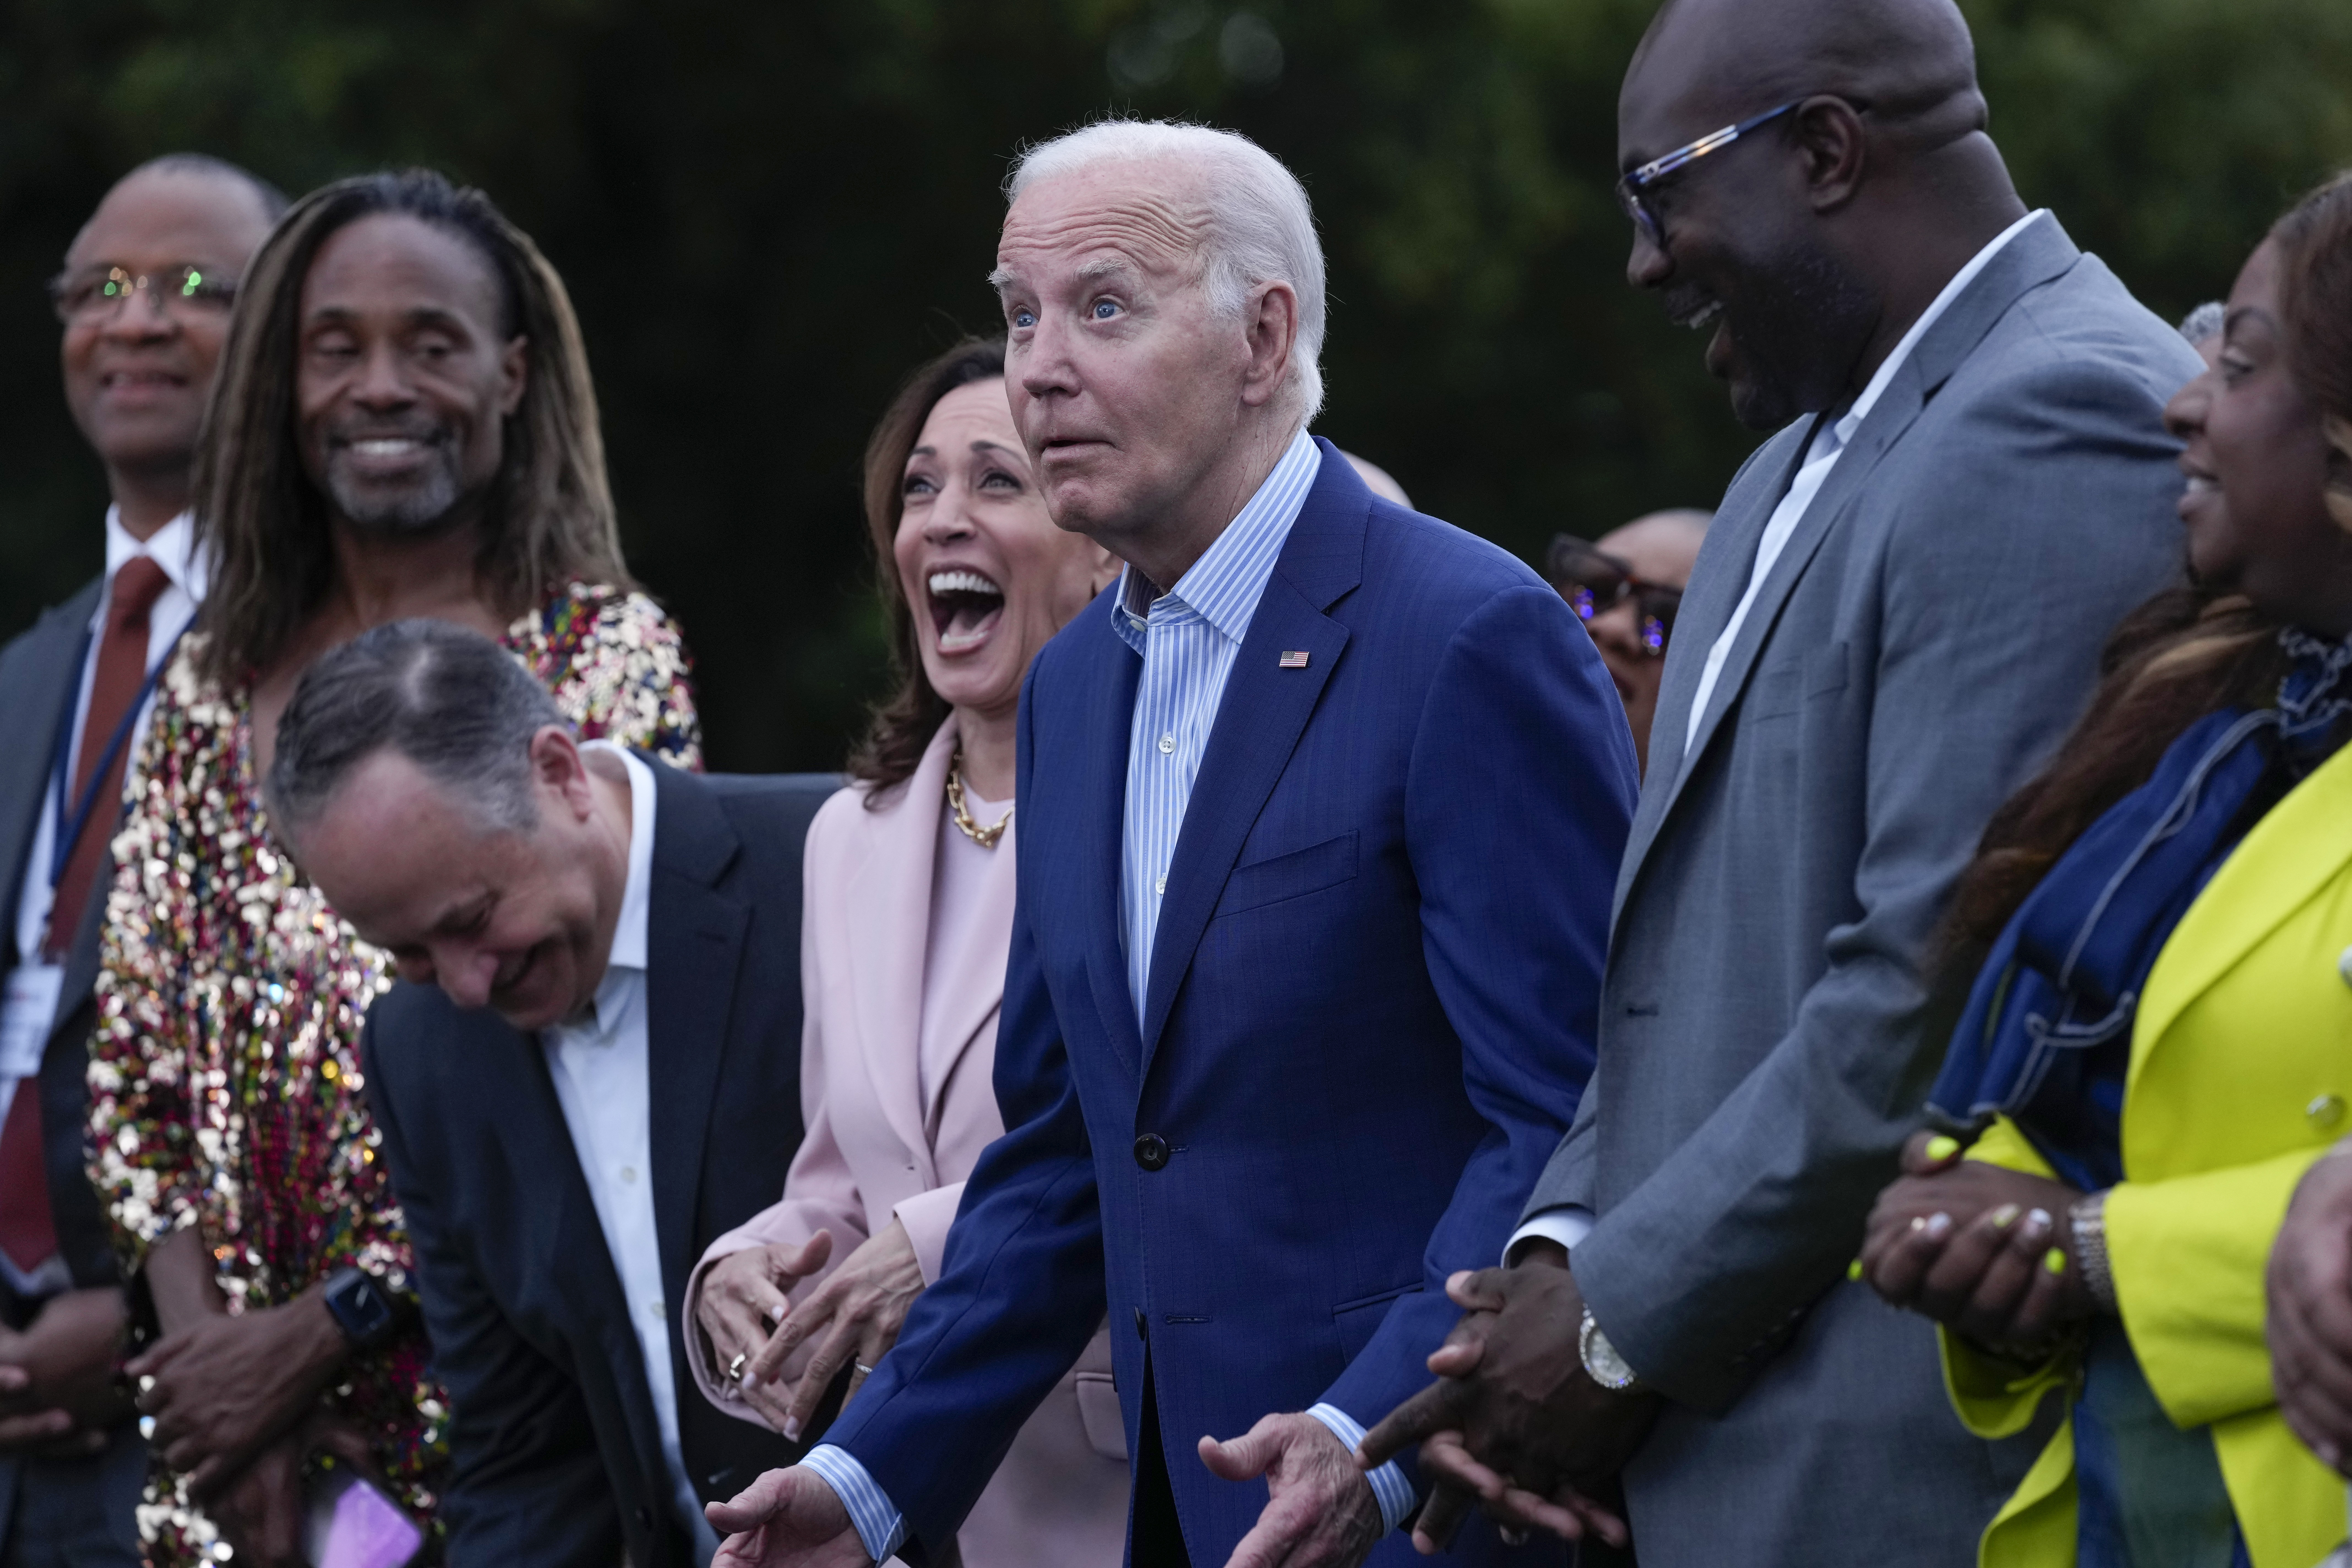 Biden was compared to a robot when he froze for 30 seconds during a concert